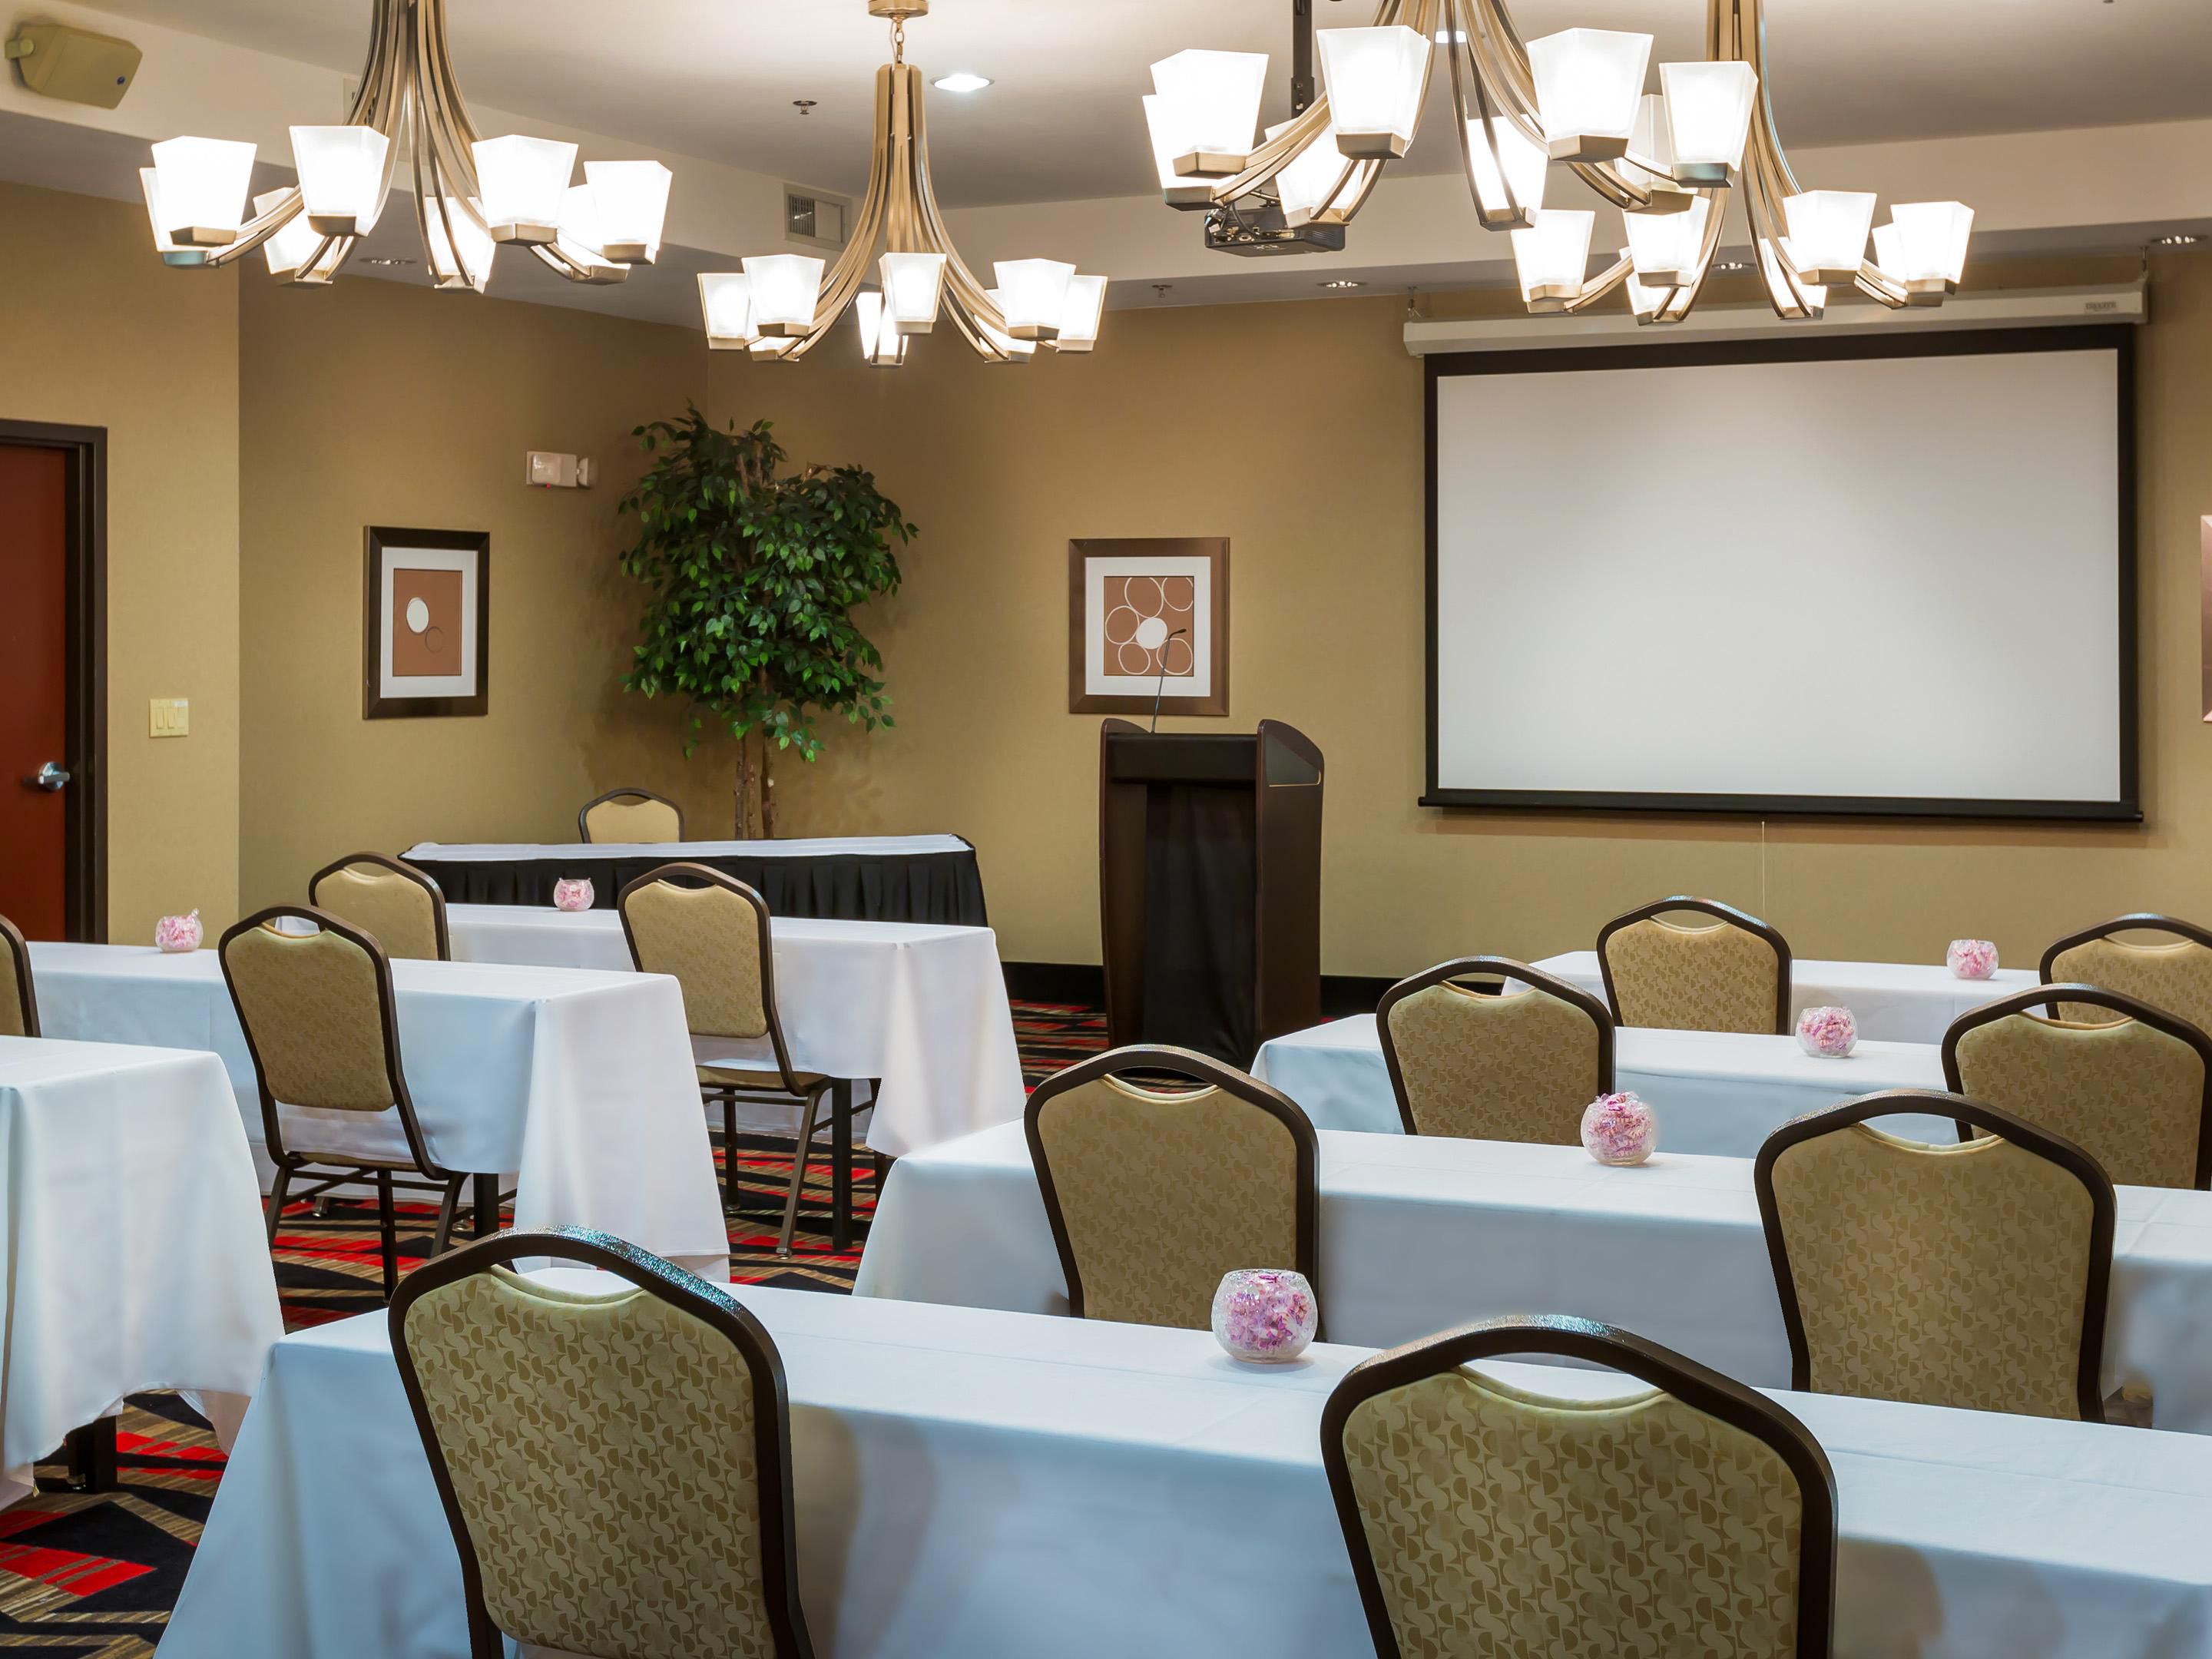 Stay rested and productive during your OKC business trip with comfortable accommodations and convenient amenities at our hotel. We offer on-site breakfast, fitness facilities, and a 24-hour business center with print, copy, and fax services. You can also host private meetings when you reserve our flexible venues with 2,700 sq. ft. of event space.